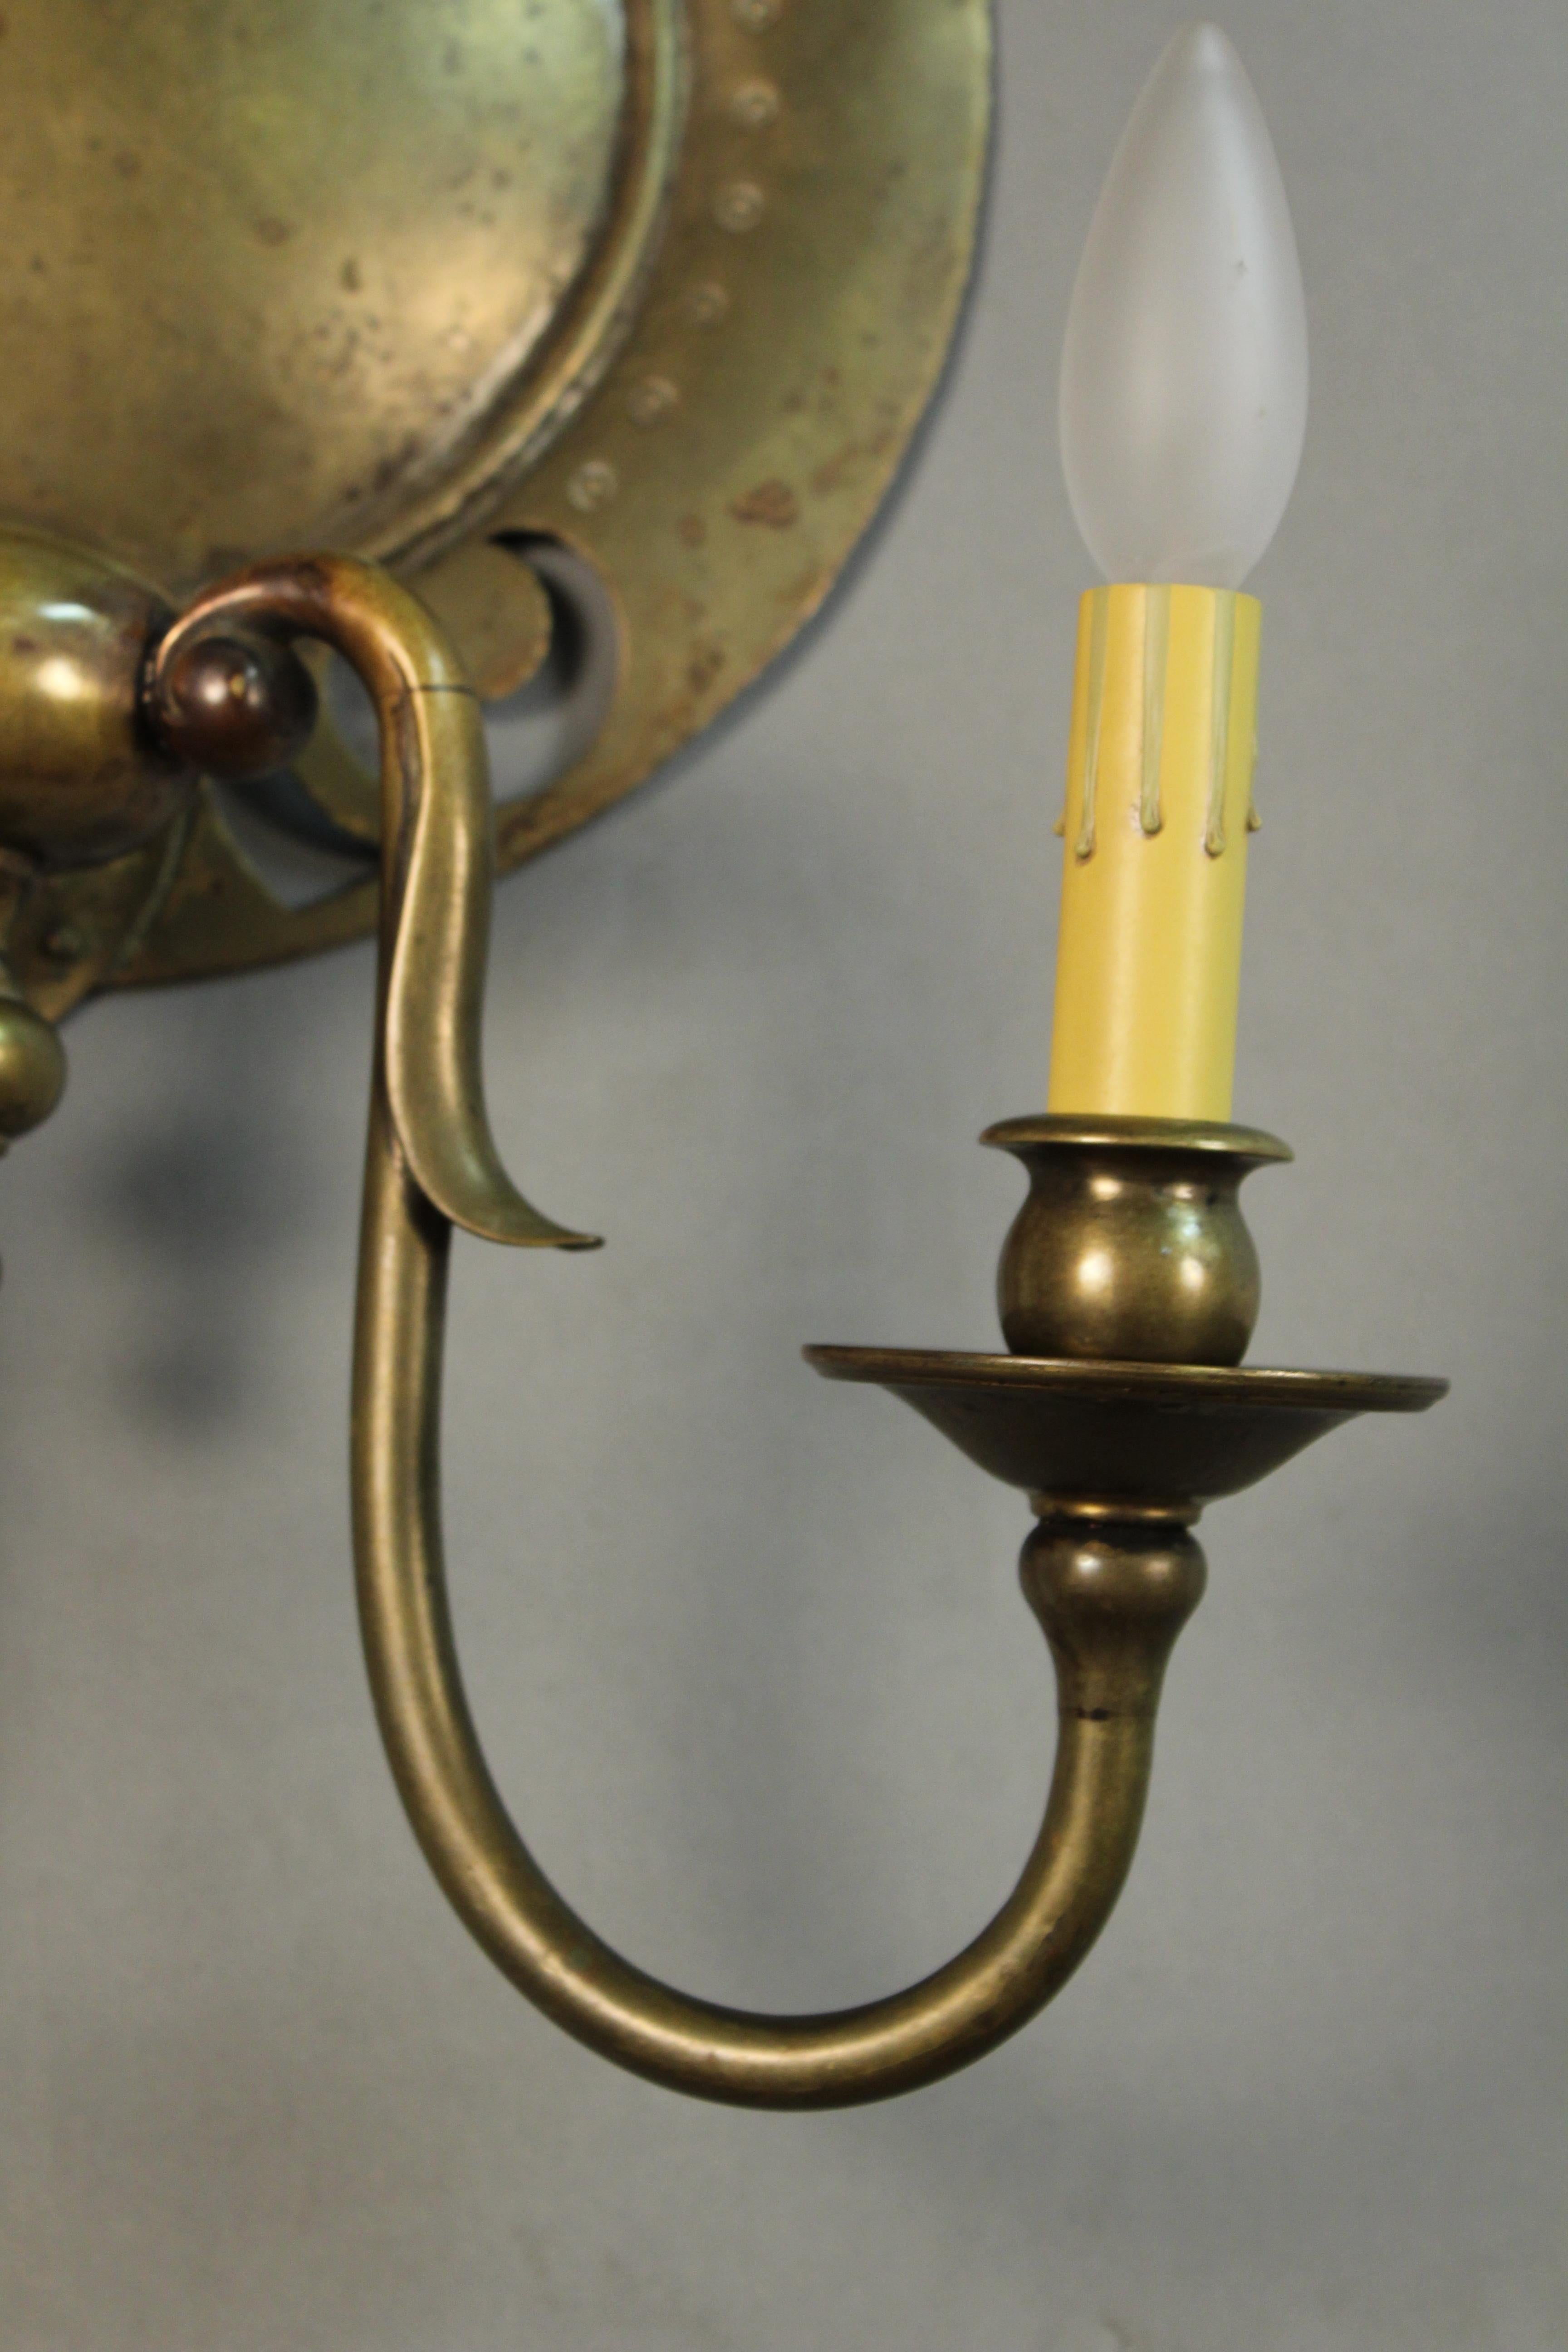 Pair of Large English Tudor Spanish Revival 1920s Sconces with Knights In Good Condition For Sale In Pasadena, CA